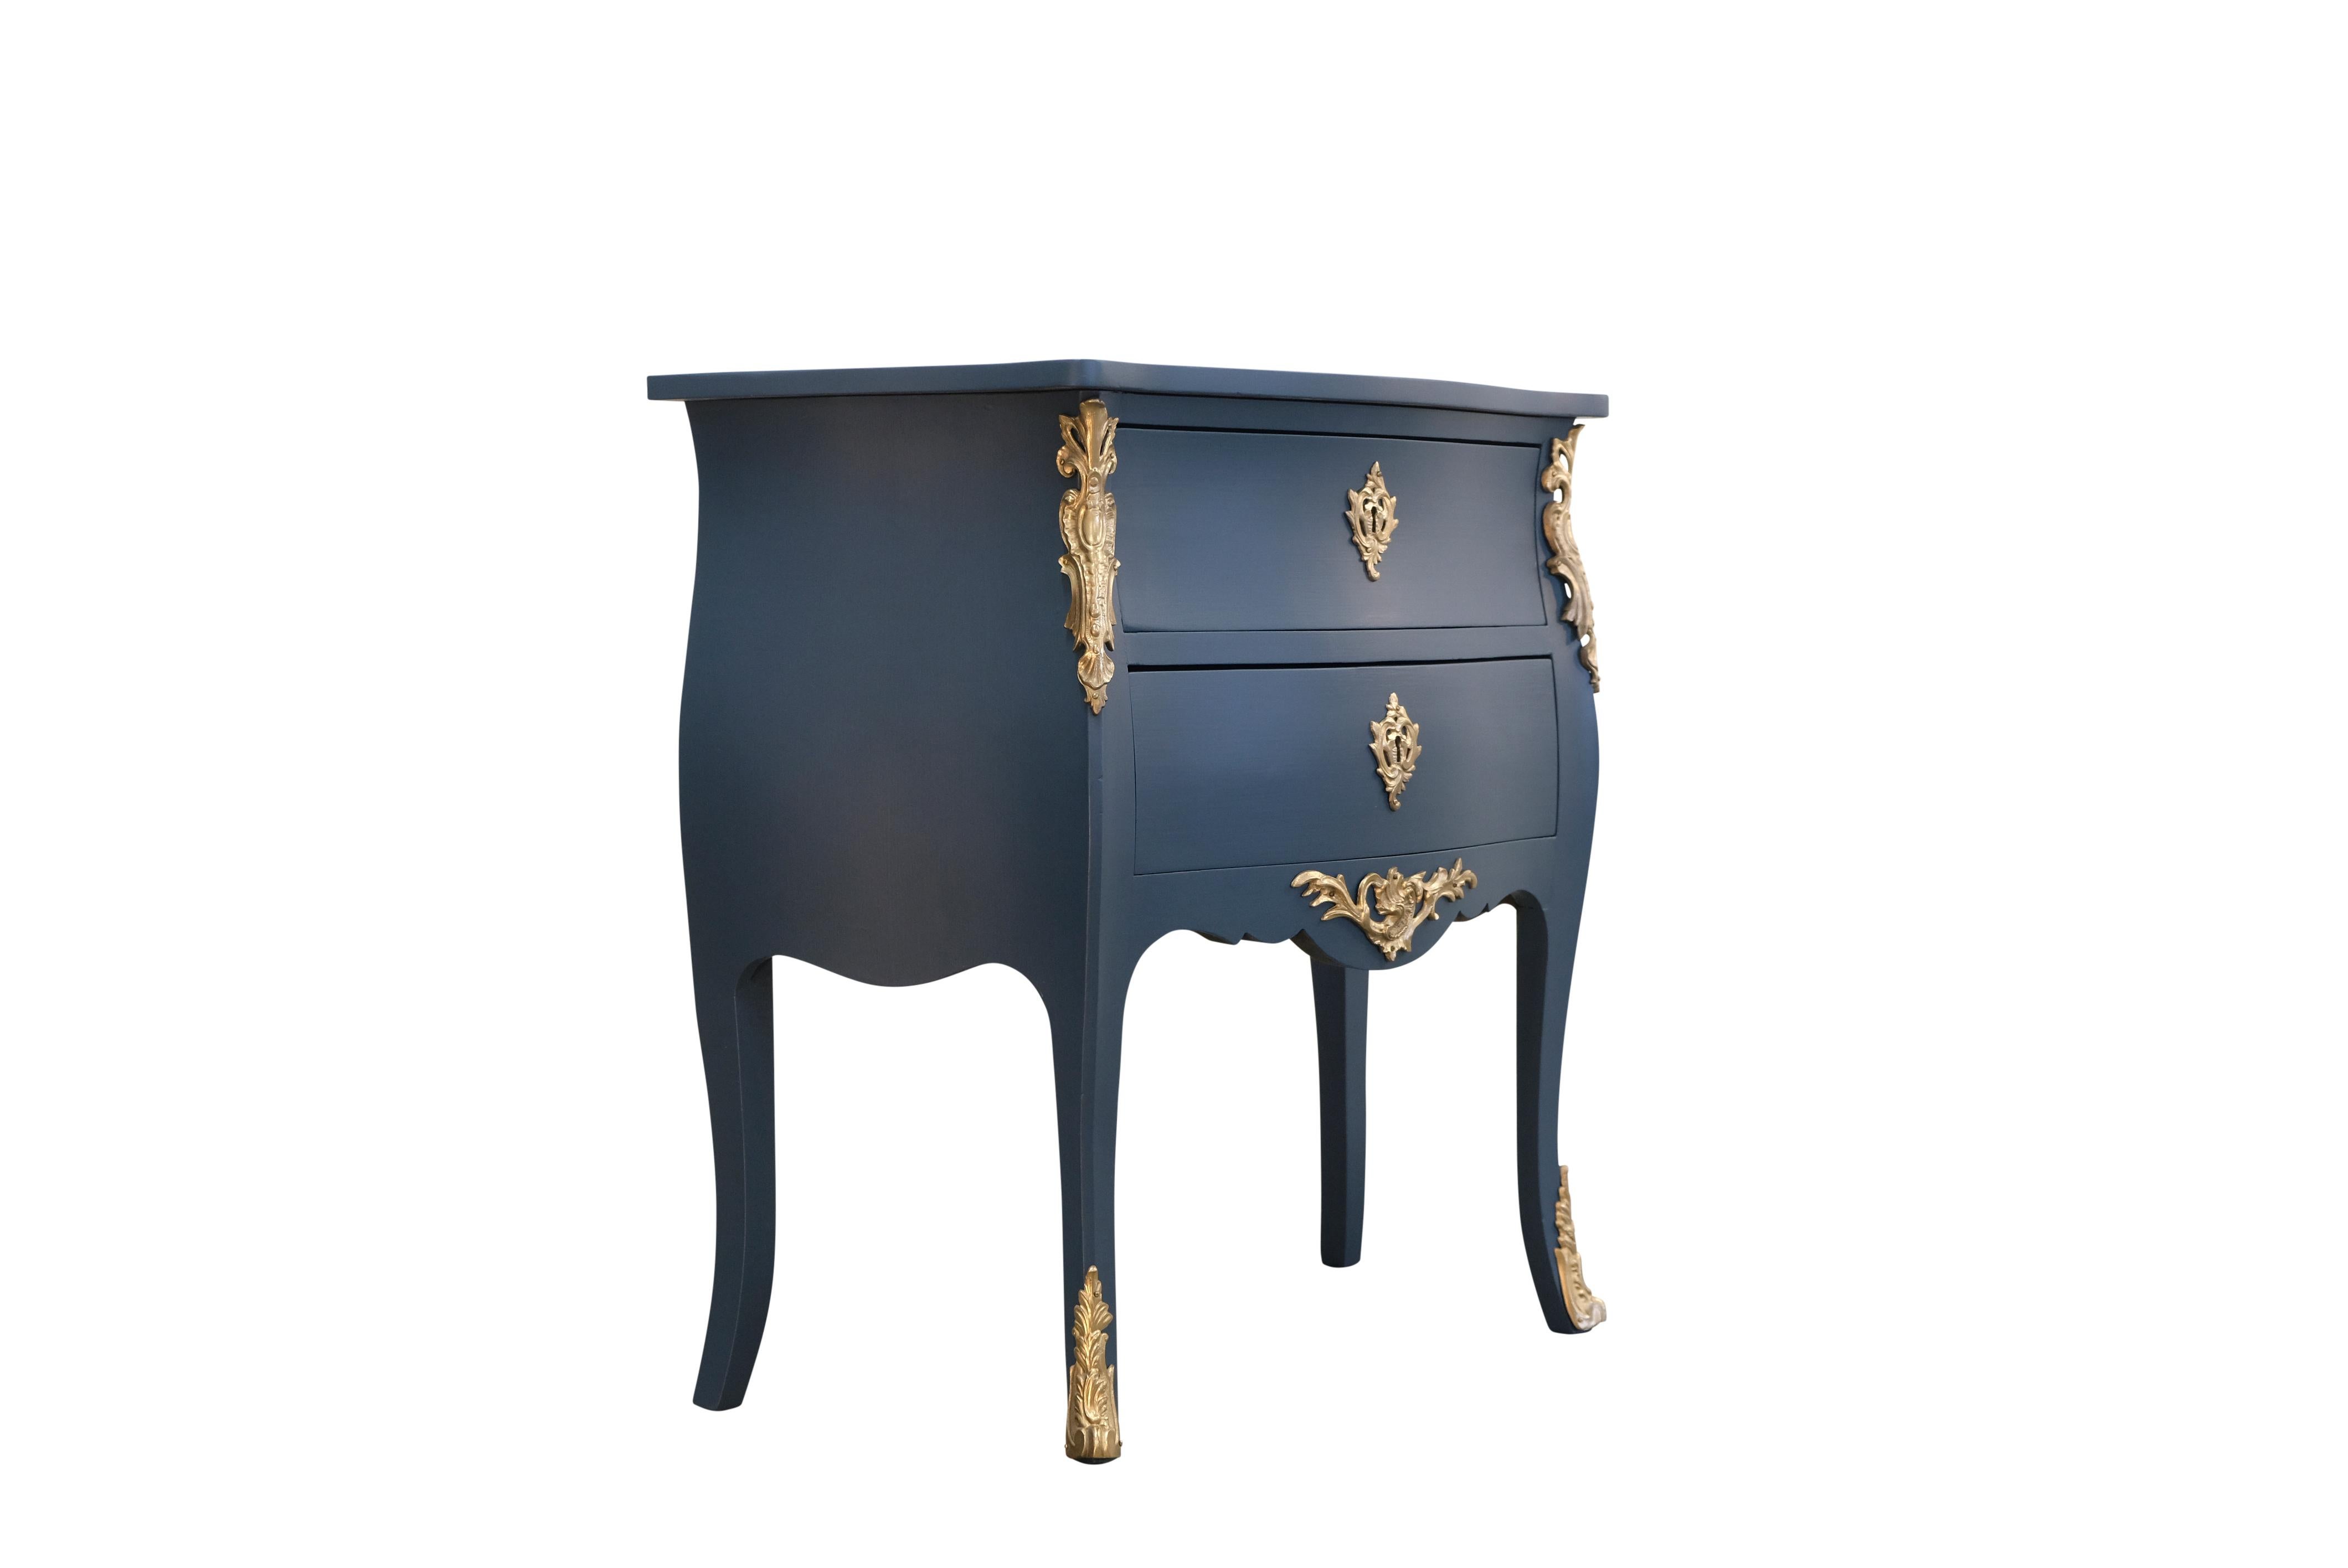 Gustavian Hauptbyrå with marble slab and frame in midnight blue. Marble slab has the same finish as the midnight blue of the chest. Fine original fittings in solid brass. 
Width: 76cm / 29.9